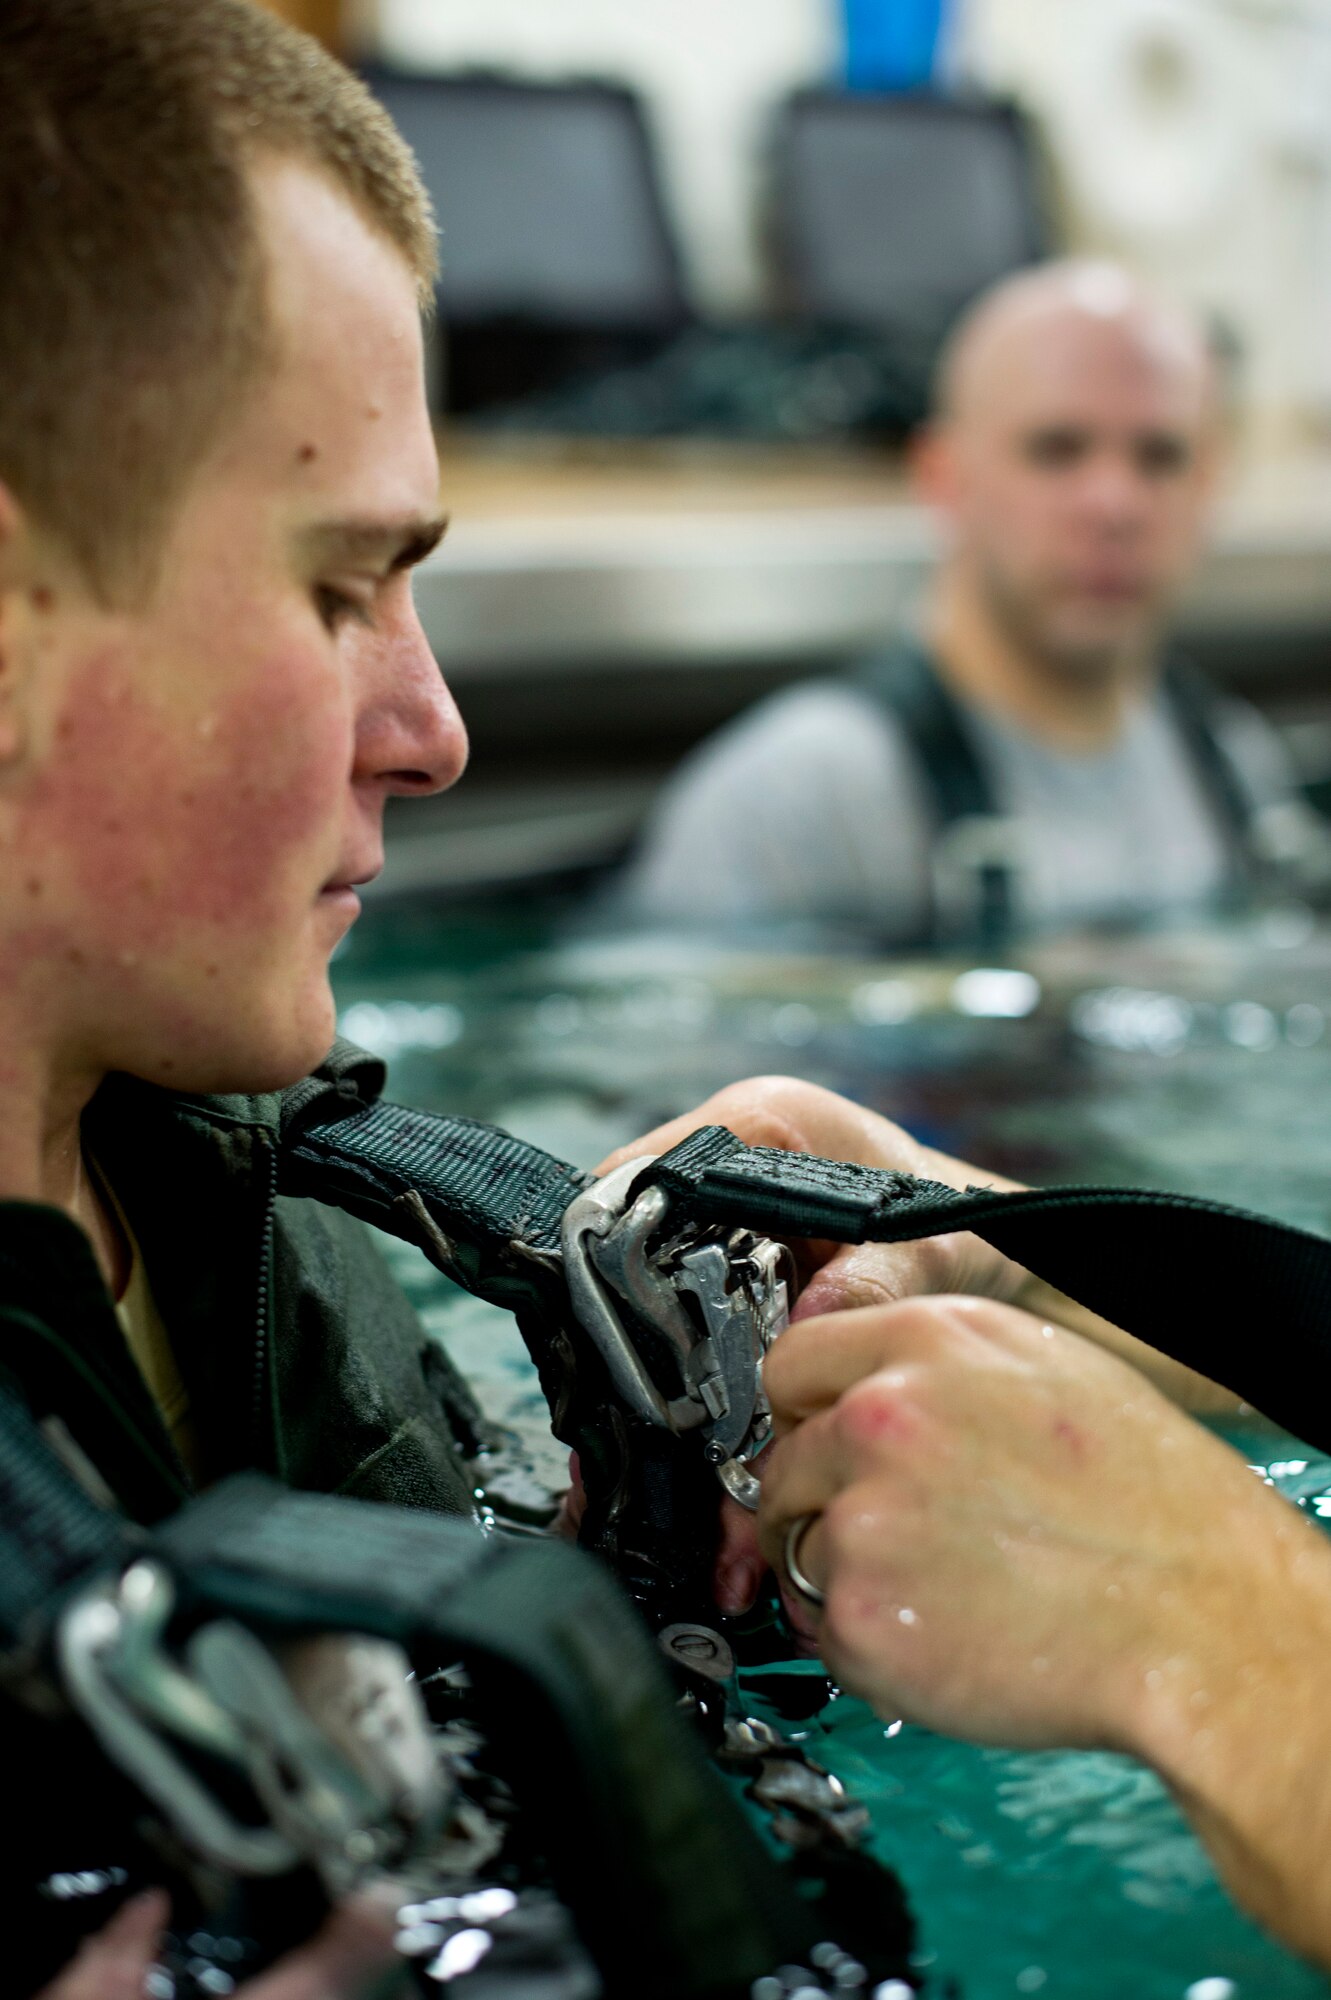 An aircrew member of the 133rd Operations Group receives help attaching his harness to simulate a parachute drag during water survival training at Foss Swim School in Eden Prairie, Minn., Jan 24, 2014. Water survival training encompasses equipment familiarization and processes in the event of an emergency over-water ditching scenario. (U.S. Air National Guard photo by Staff Sgt. Austen Adriaens/Released)